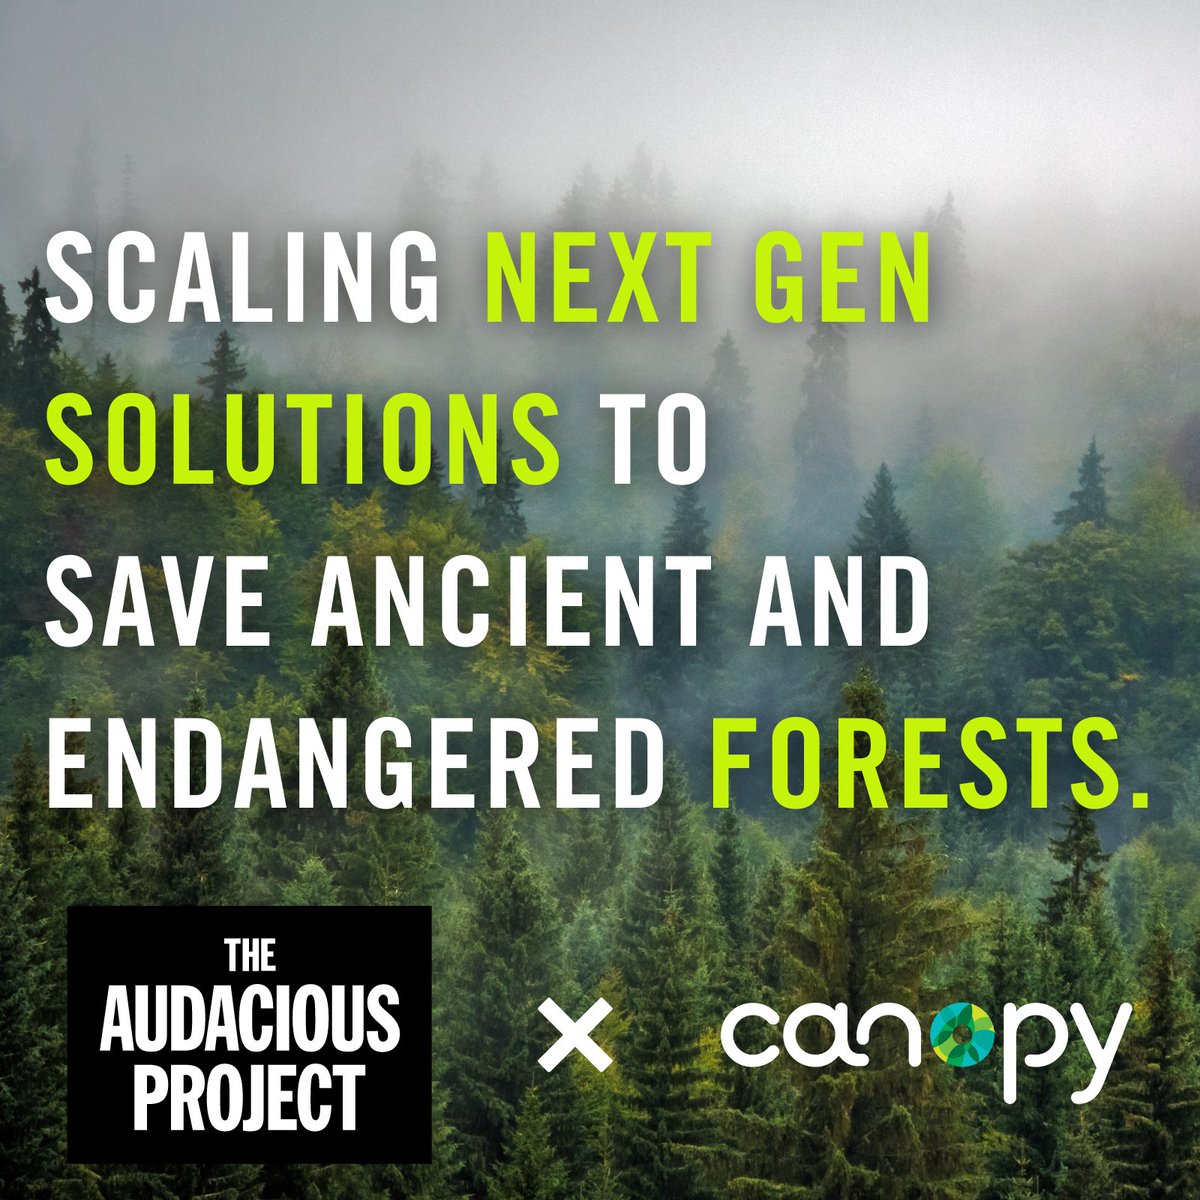 We are very happy to be partnering the audacious project by our partners Canopy in bringing circularity solutions to address the conservation of forests need. Learn more about Canopy and their inspiring work at: nextgennow.ca.
#AudaciousProject #TED2023